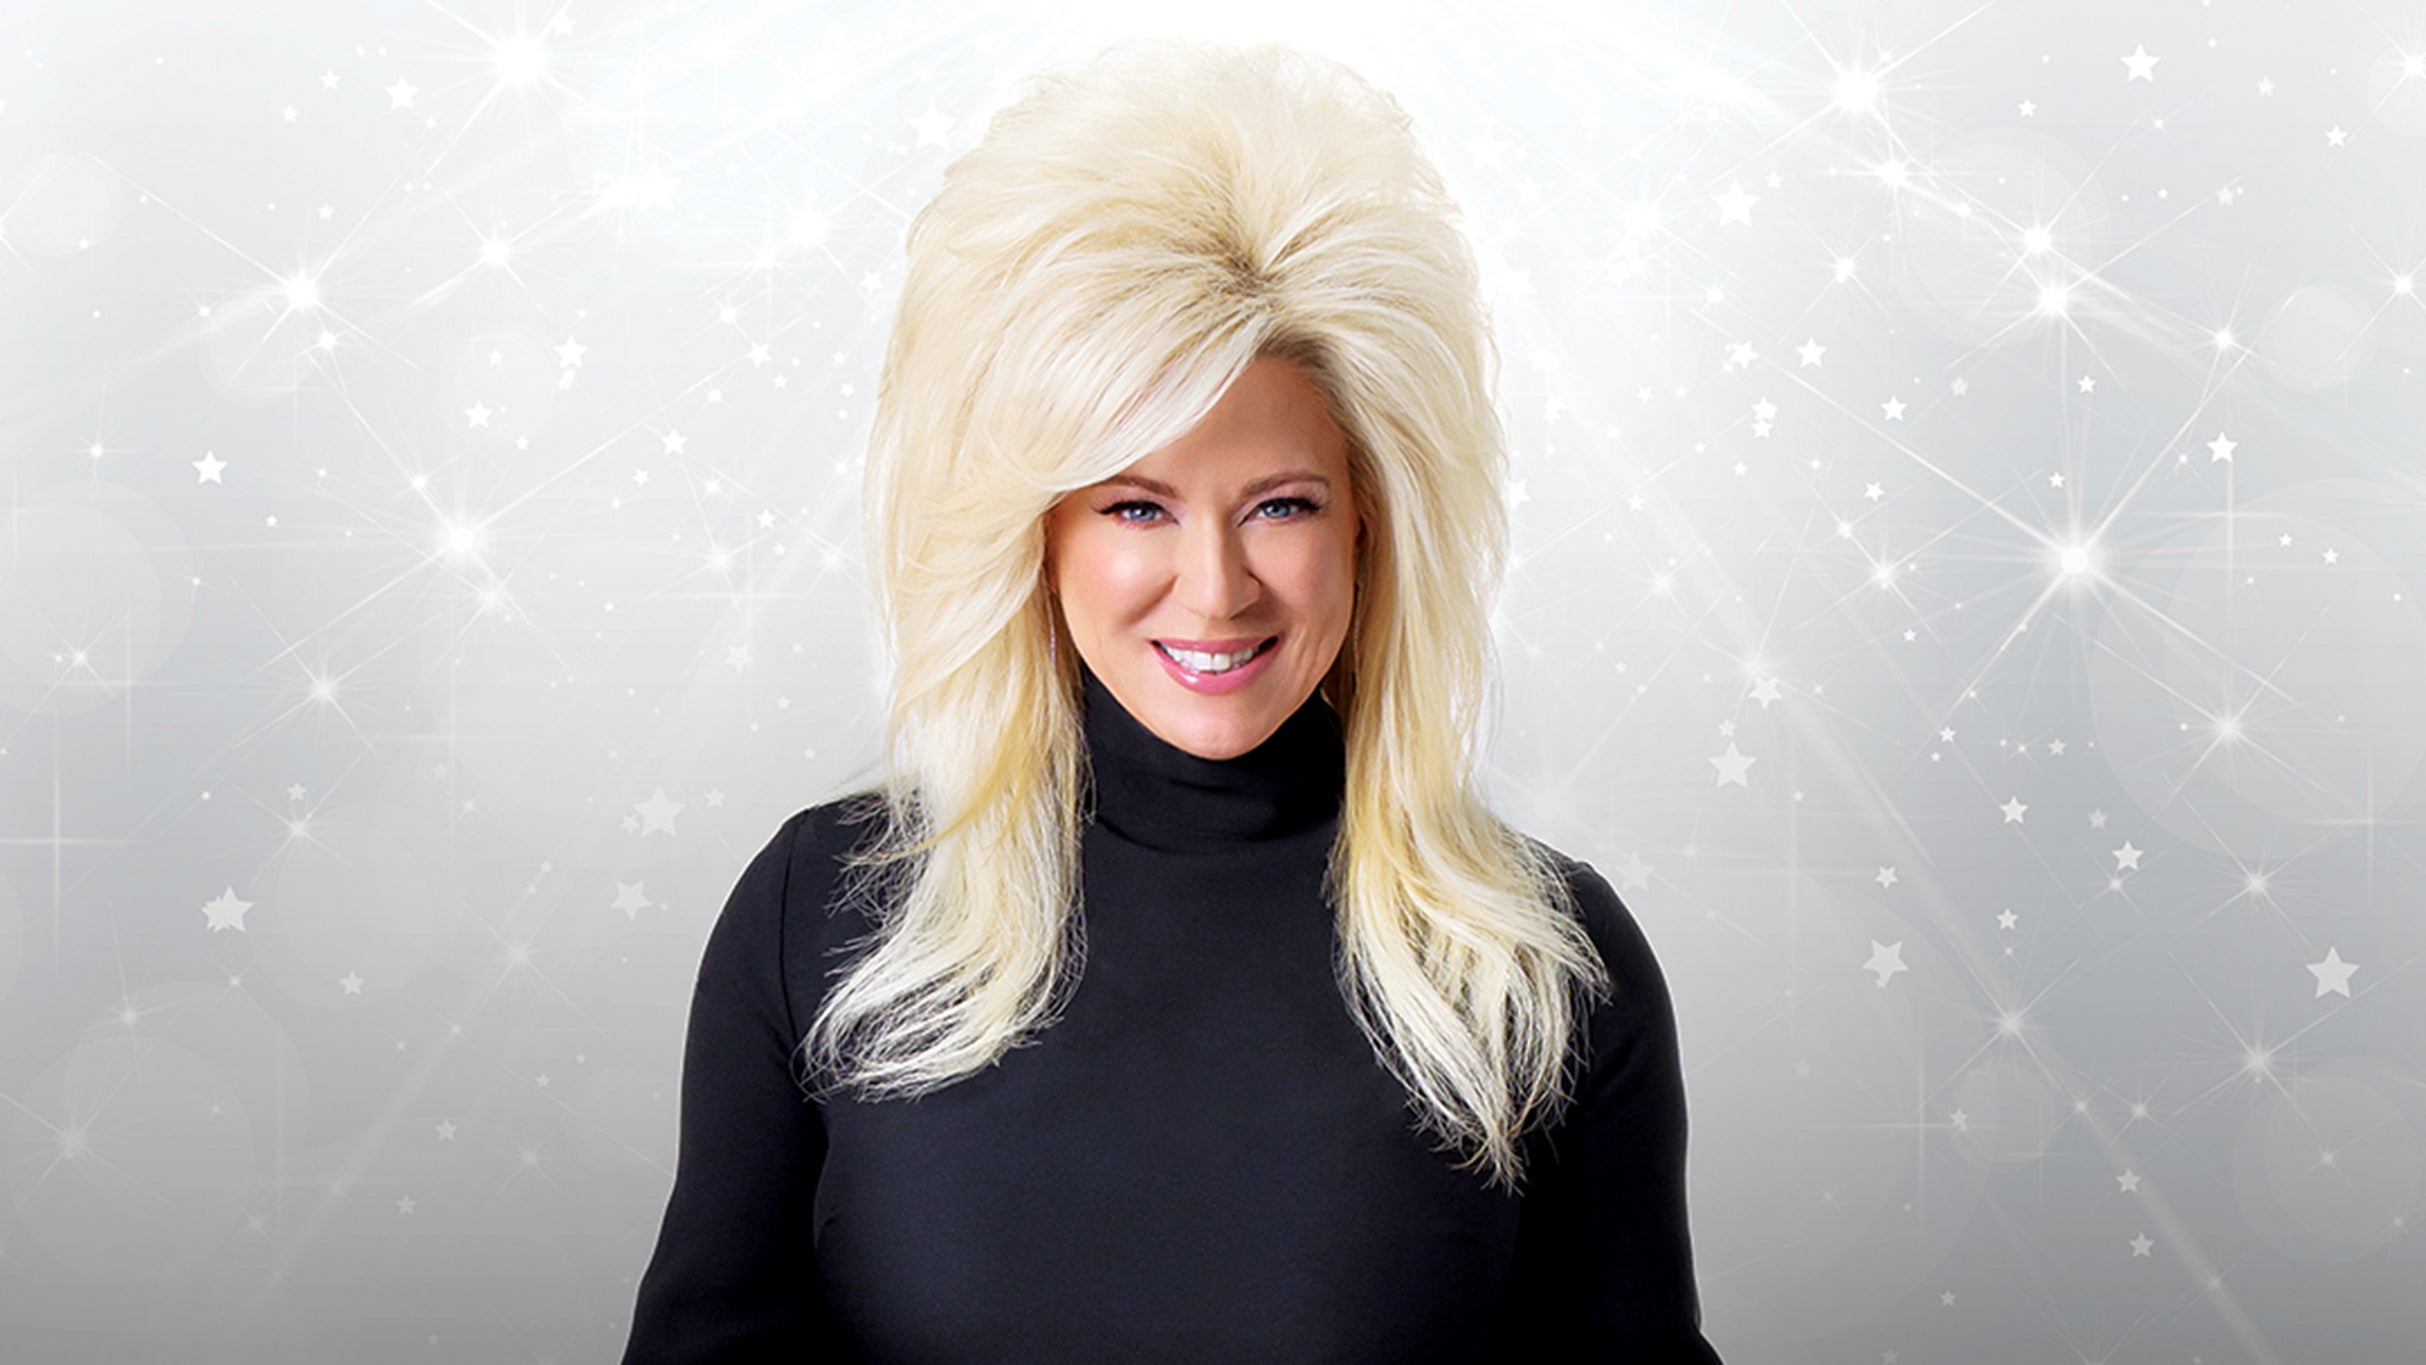 Theresa Caputo Live: The Experience in Rochester promo photo for Aisle presale offer code